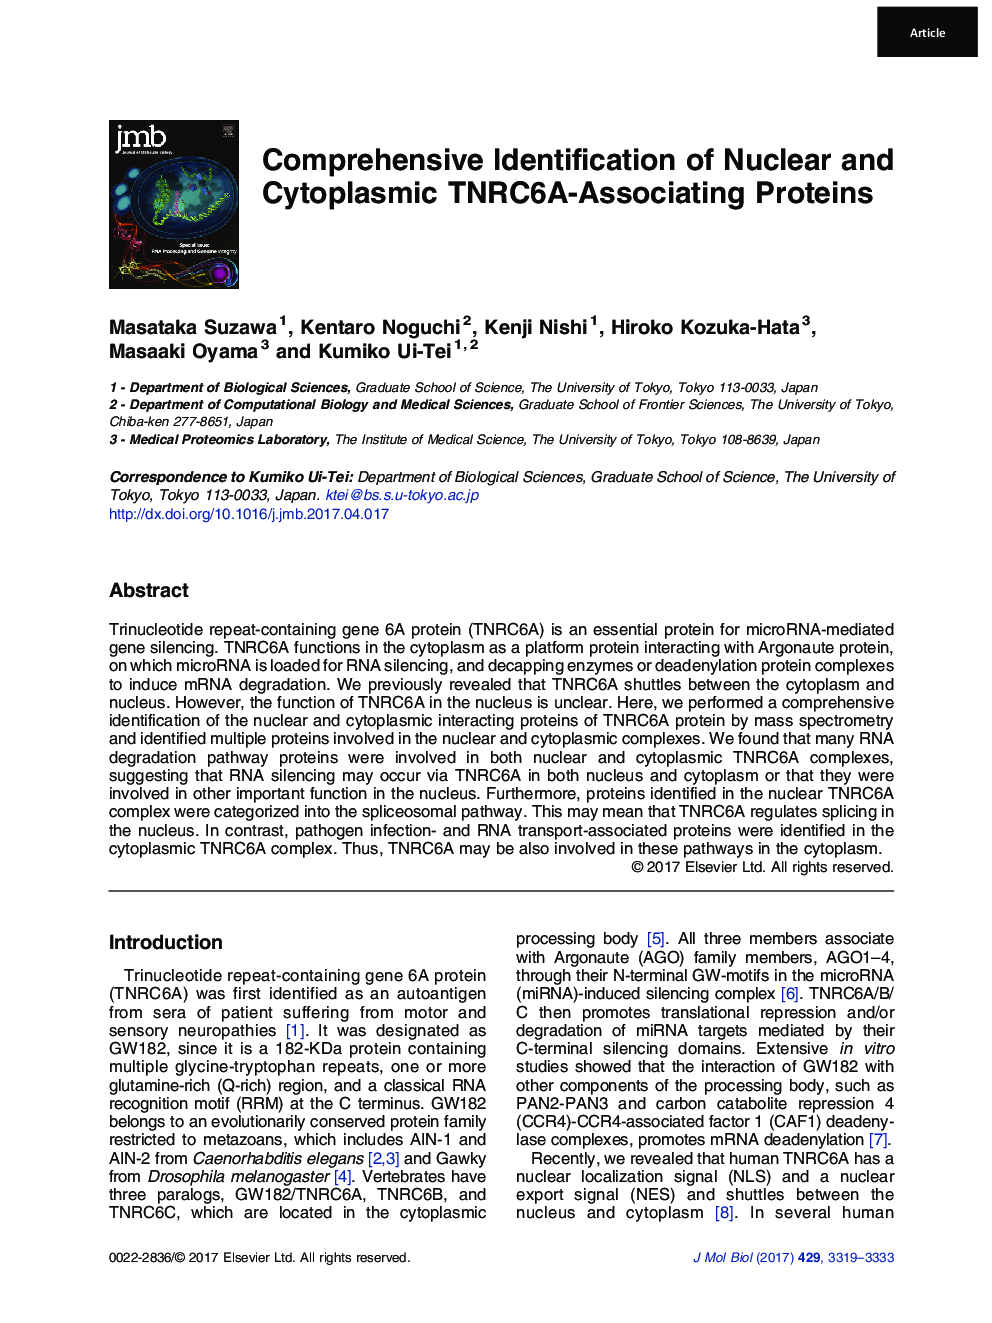 Comprehensive Identification of Nuclear and Cytoplasmic TNRC6A-Associating Proteins